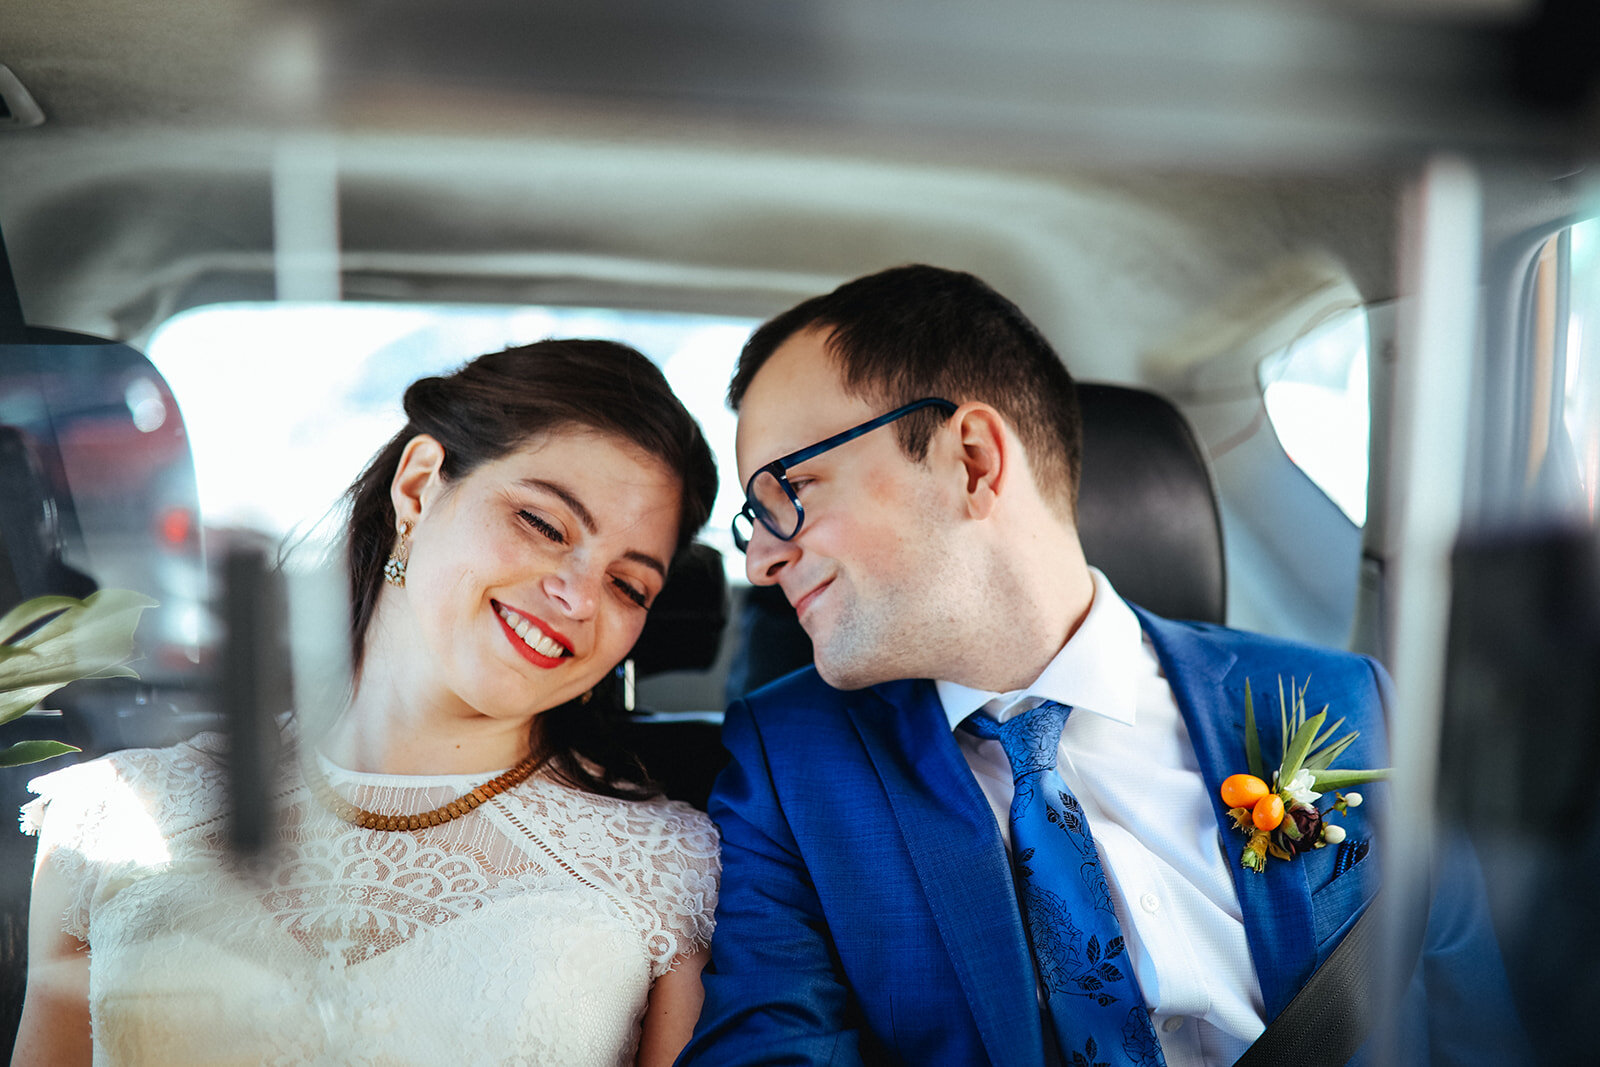 Bride and groom leaning together in a cab in Brooklyn NY Shawnee Custalow wedding photography